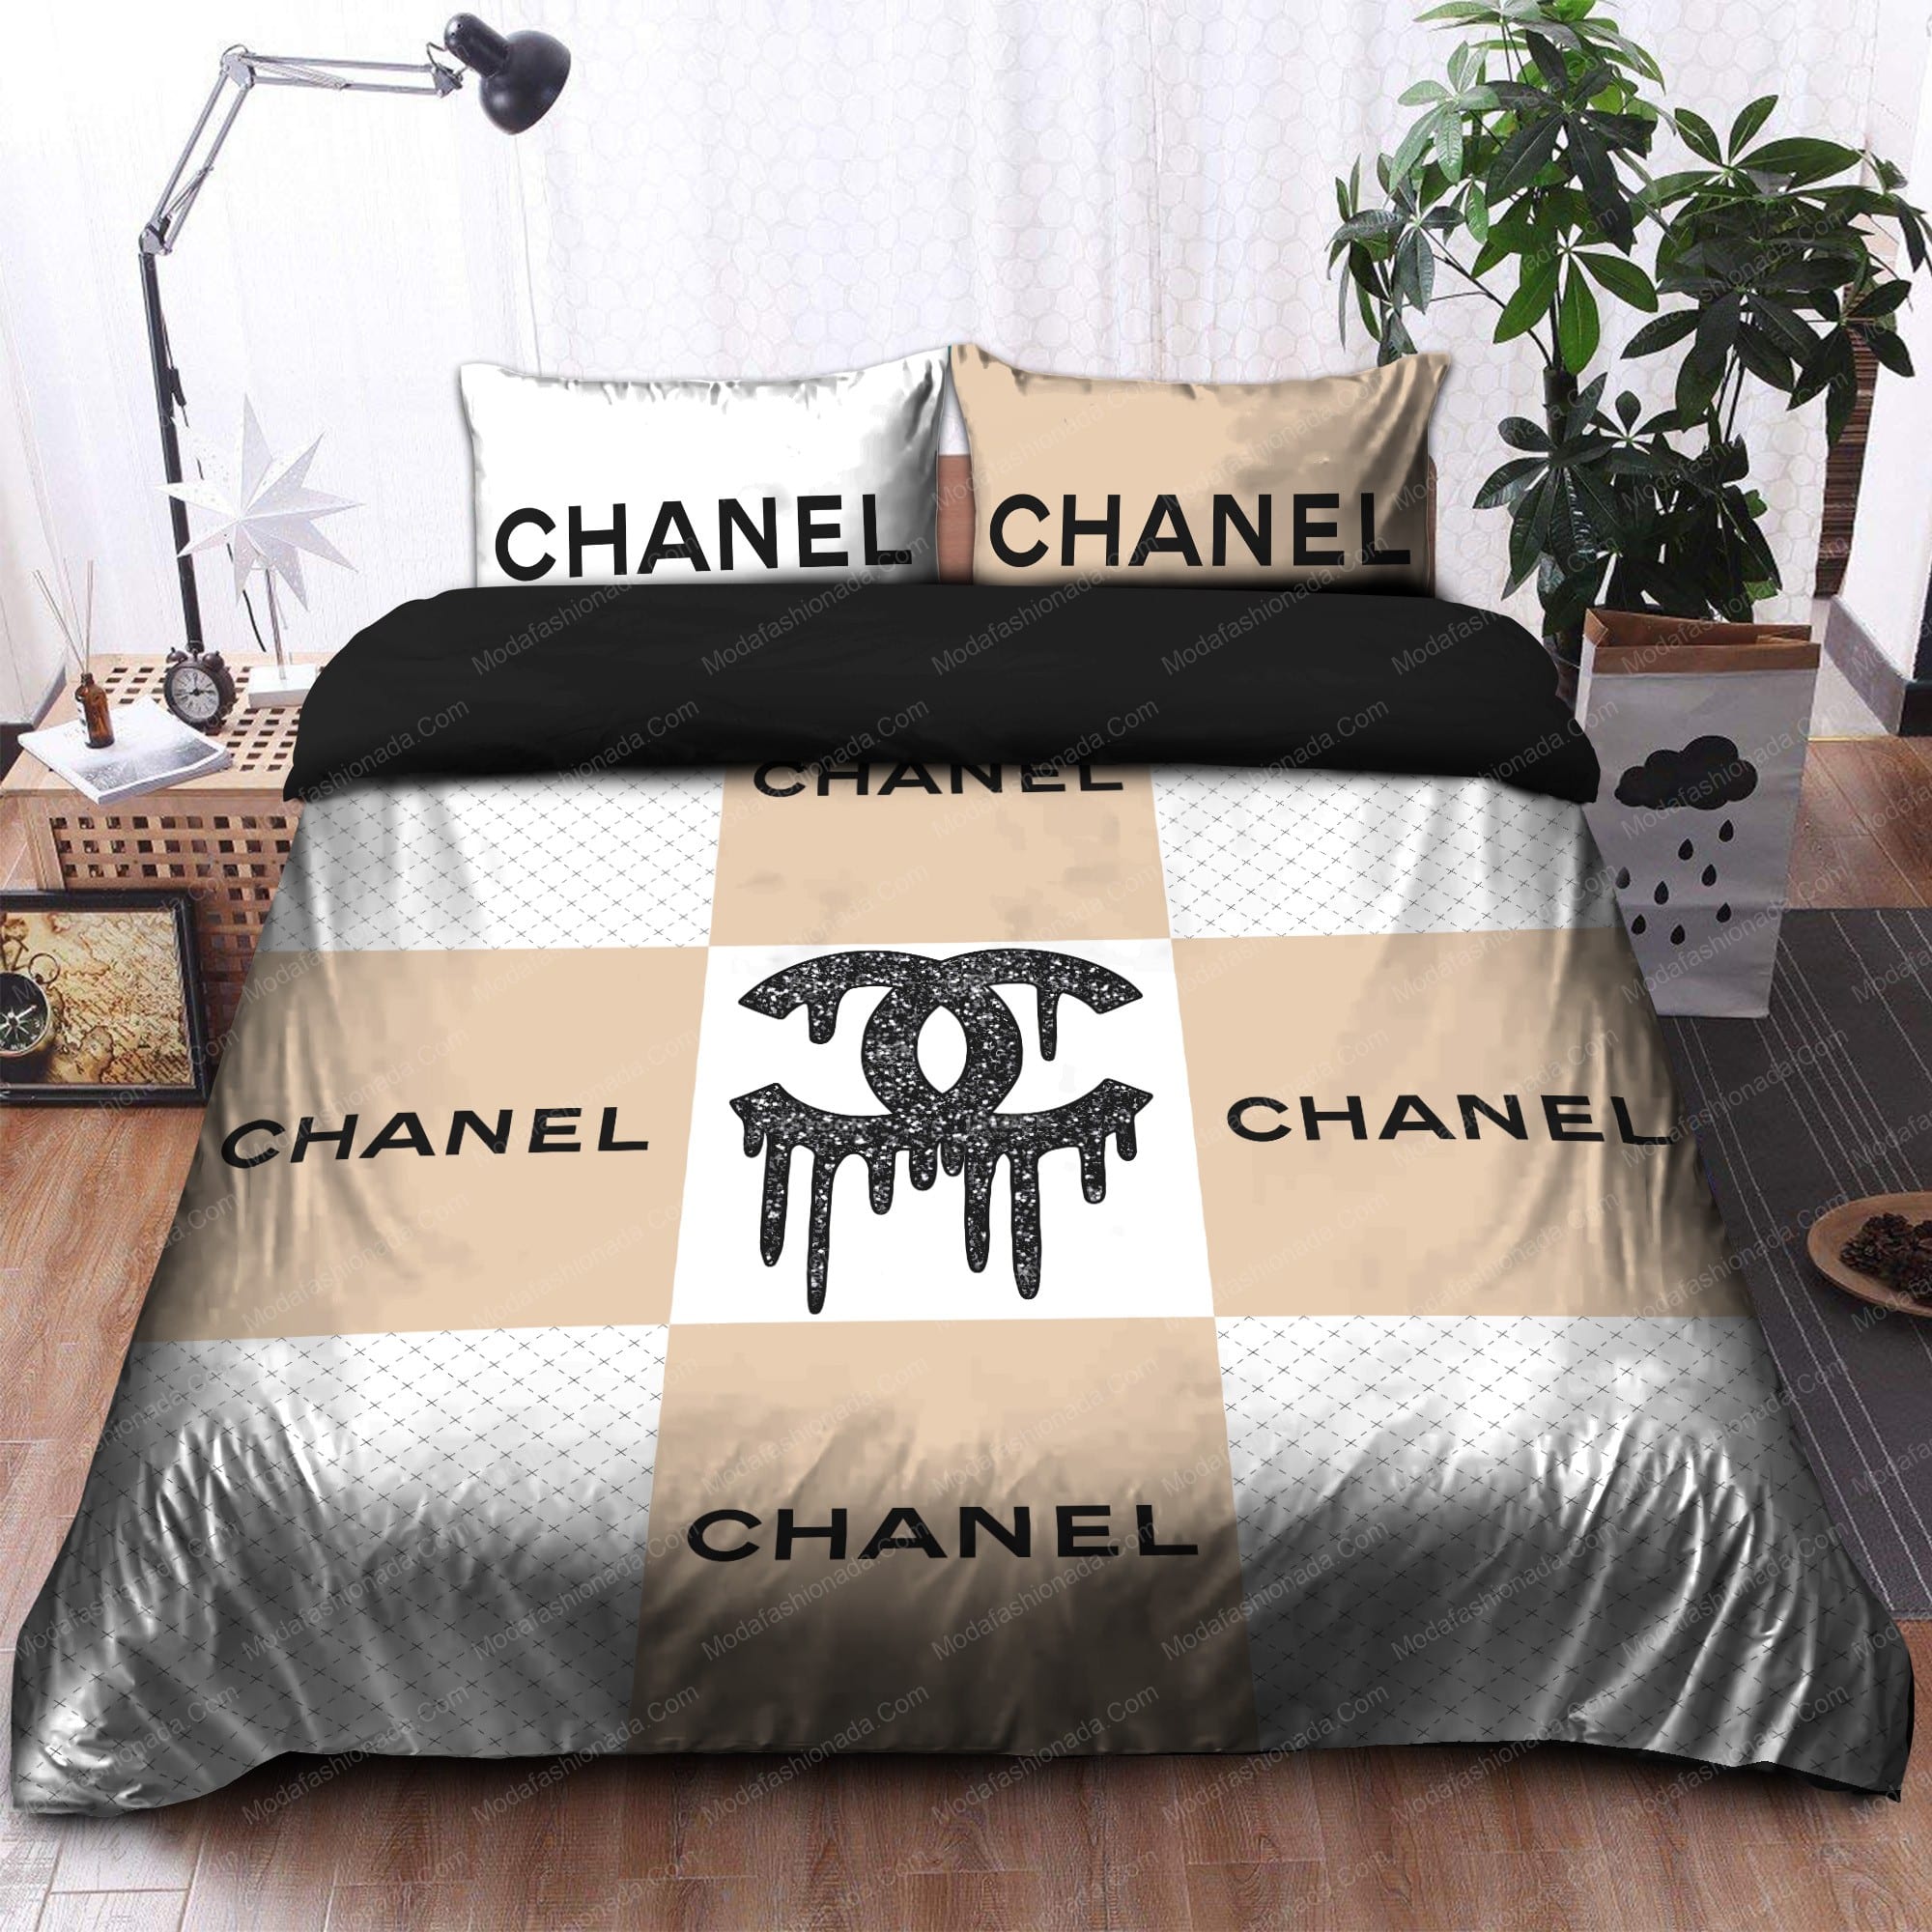 Buy Chanel Logo Bedding Sets Bed Sets With Twin, Full, Queen, King Size